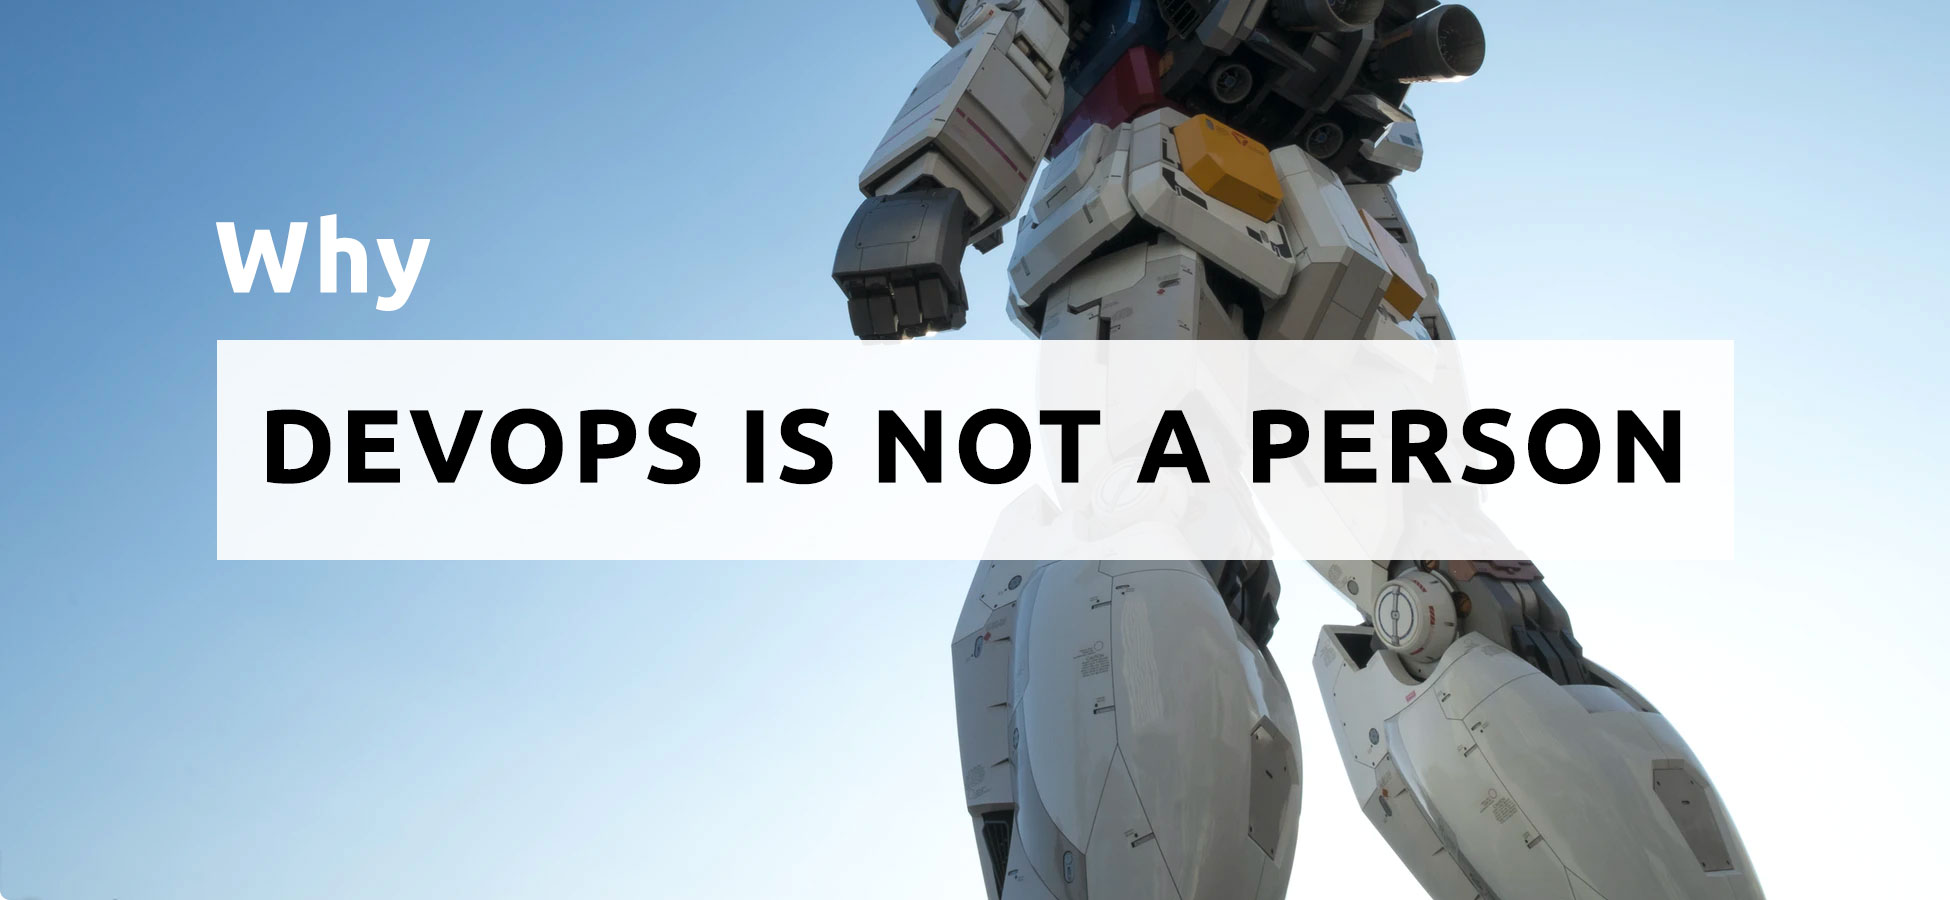 If someone would like to hire me for a role of DevOps Engineer, they probably think "What does a DevOps person do?" It's important to remember that _DevOps_ is a methodology first, and only secondary, DevOps is a role.